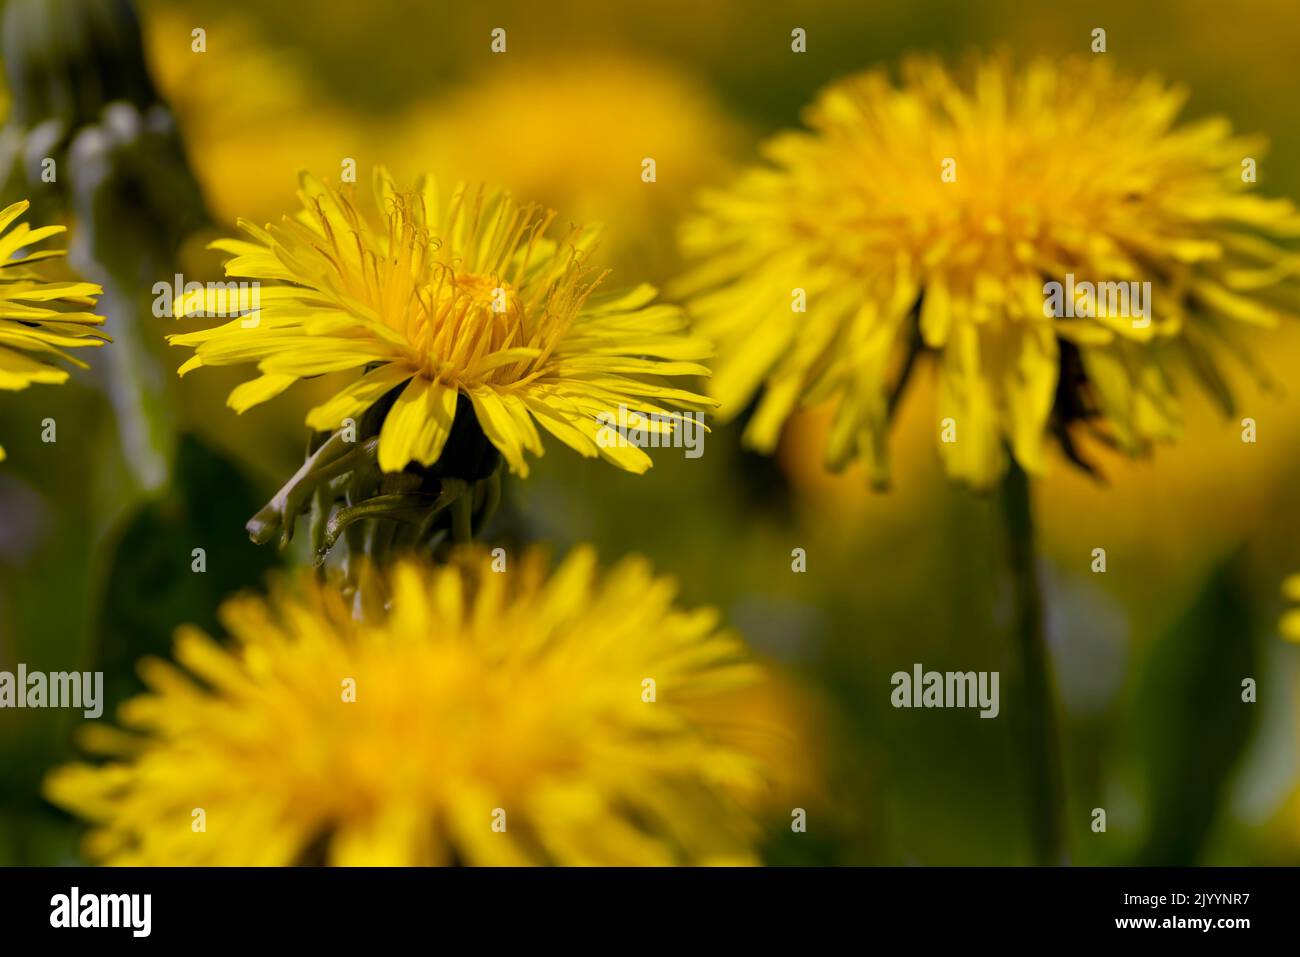 a field where a large number of yellow dandelions grow, blooming dandelions in a spring field with grass and flowers Stock Photo